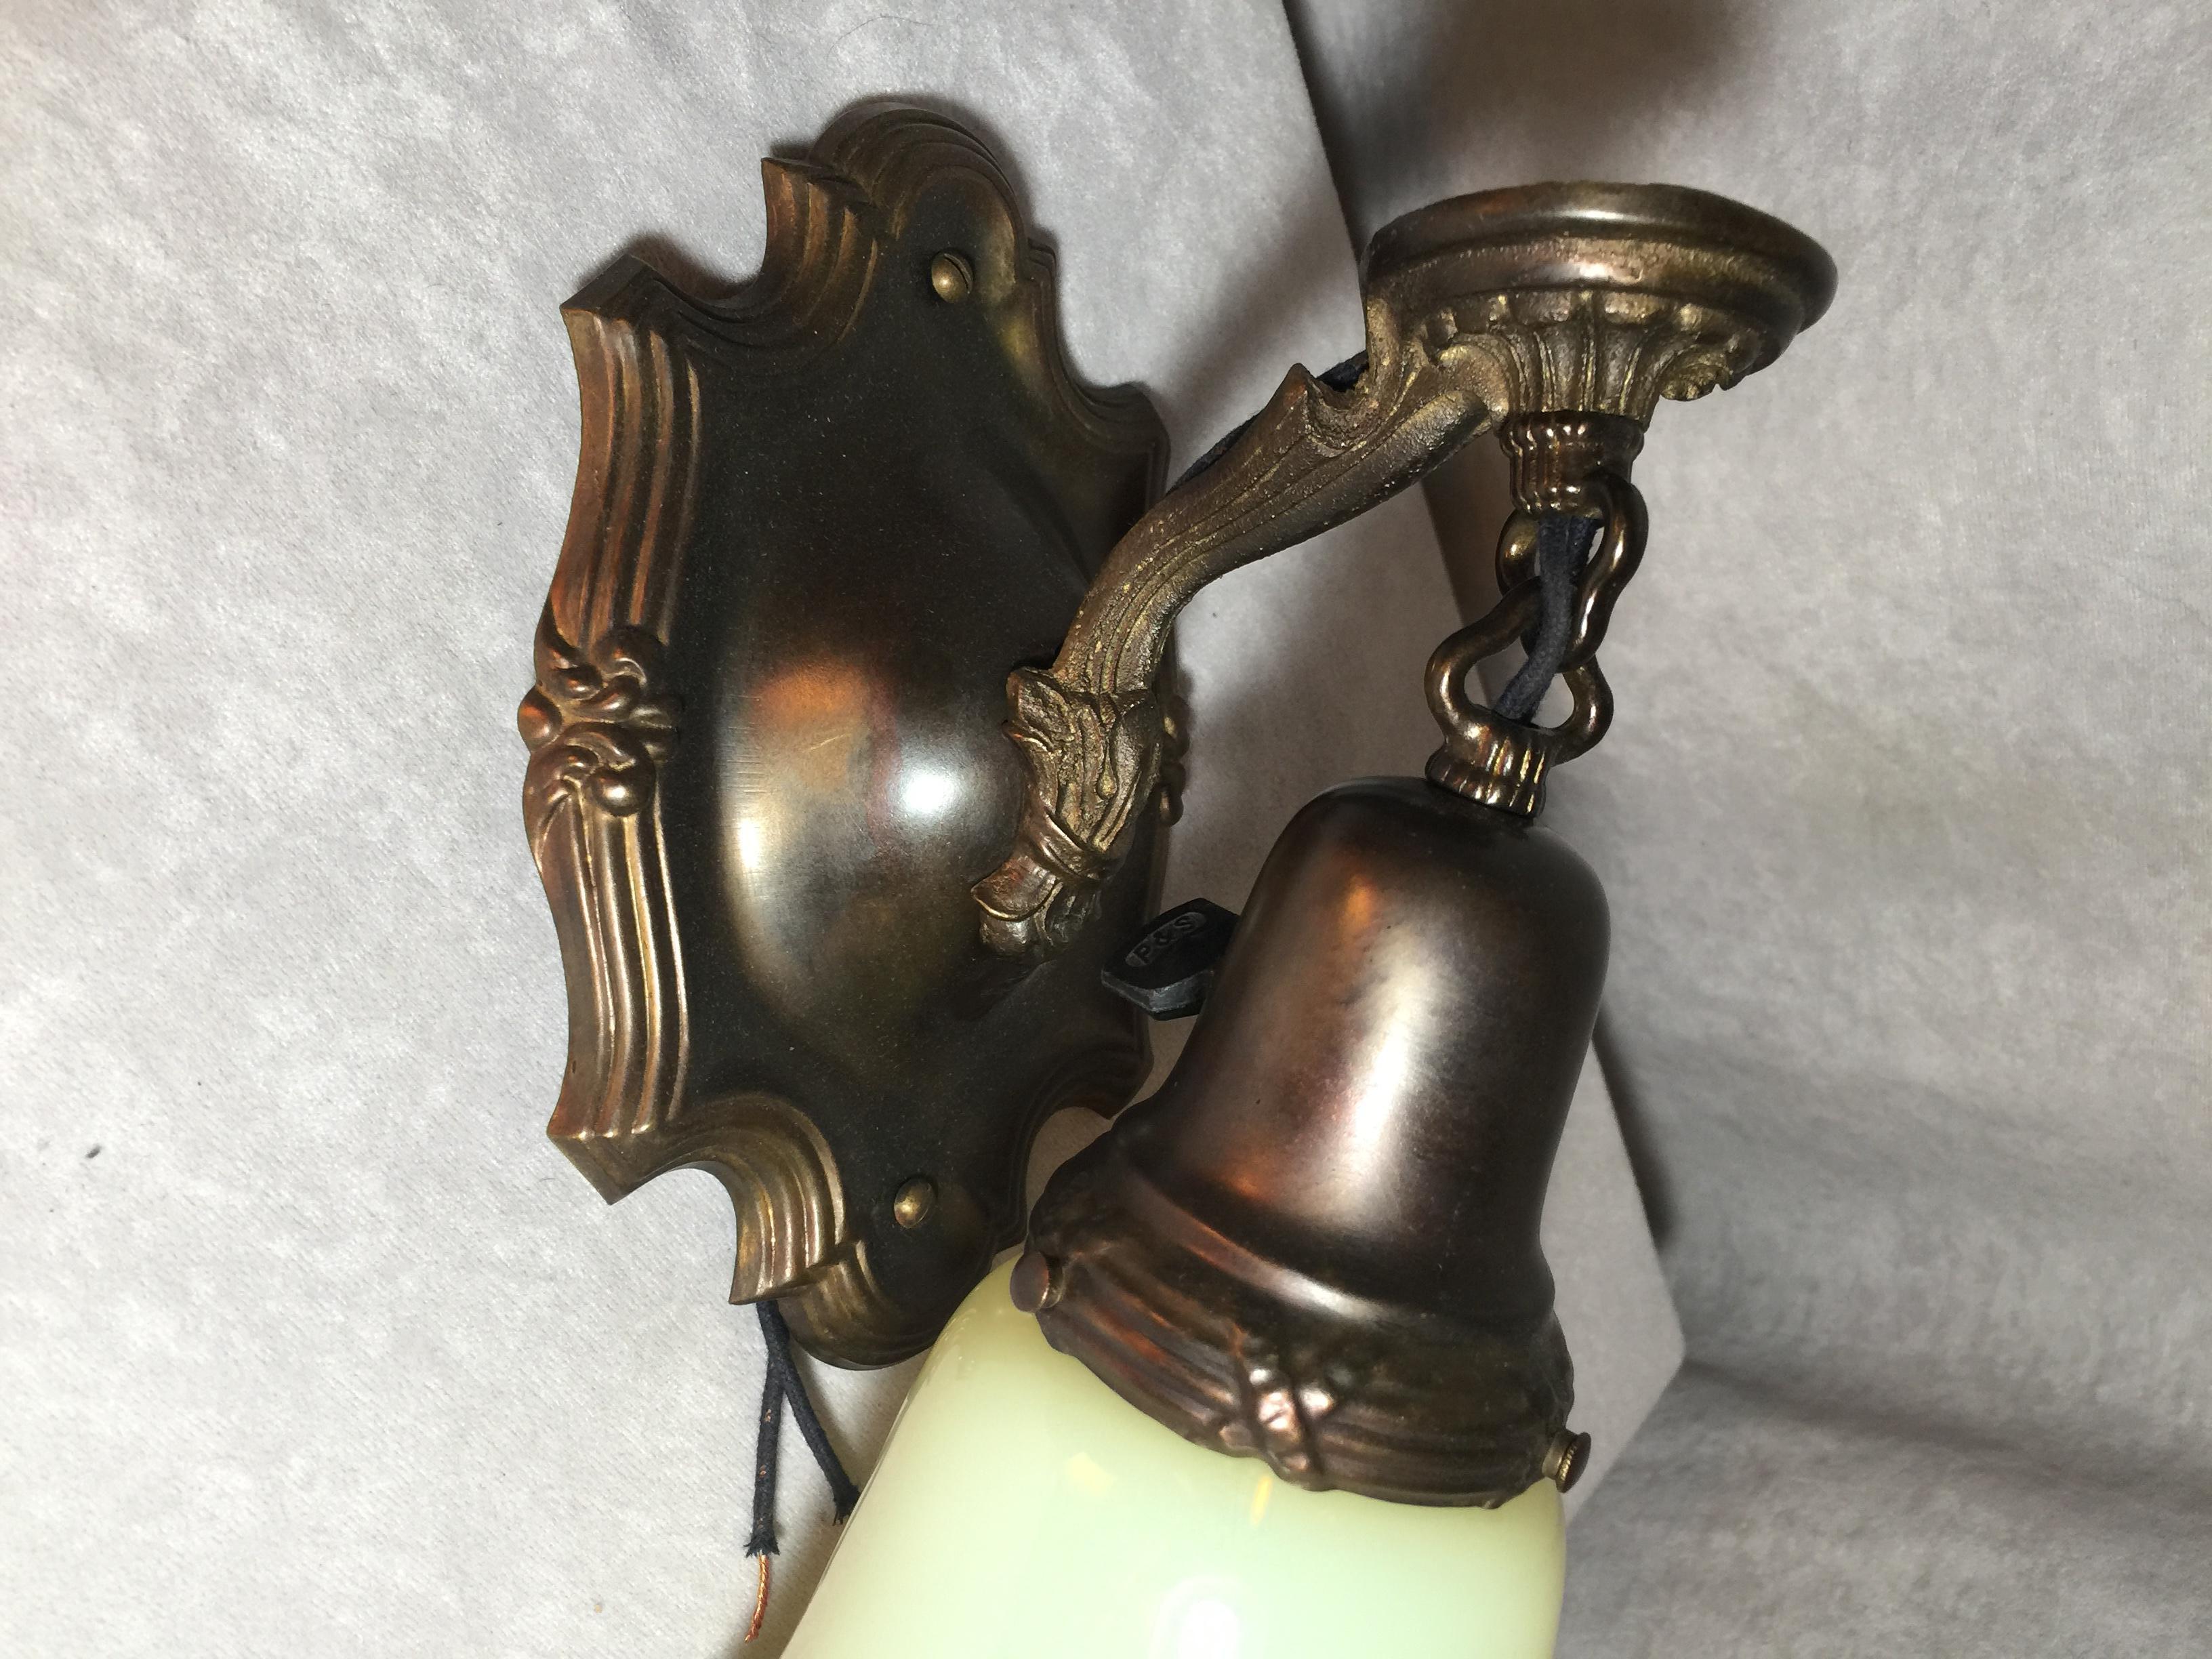 Offering a nice simple pair of Edwardian sconces in a rich deep brown patina with a pair of original period Vaseline glass shades. A nice package for any room. Newly wired and ready to hang. The price listed below is for the set, you get both for